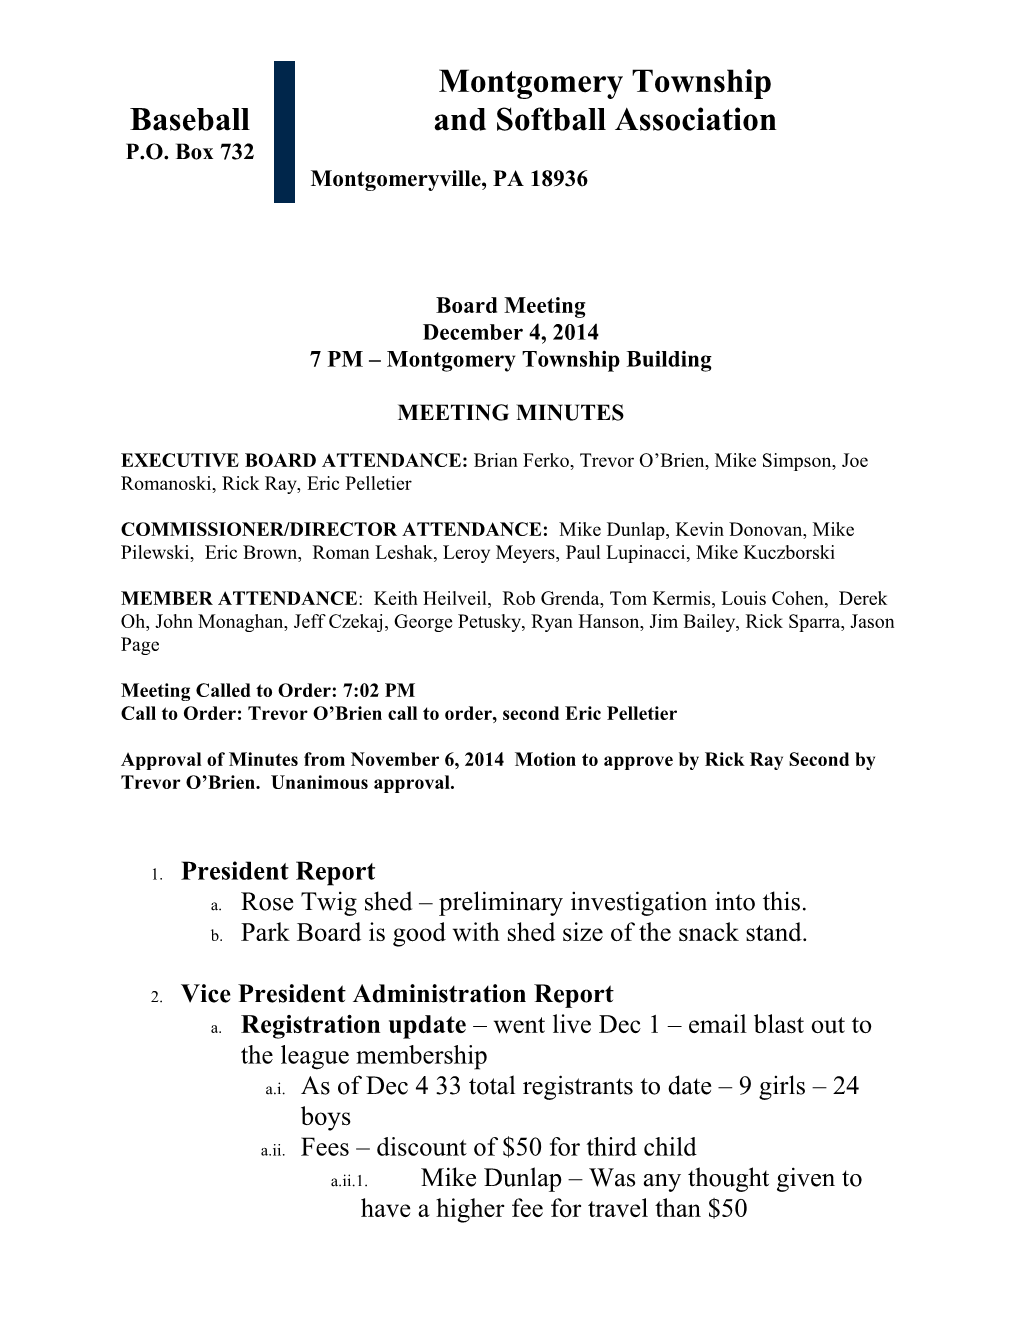 Monthly Board Meeting Minutes 12/4/2014